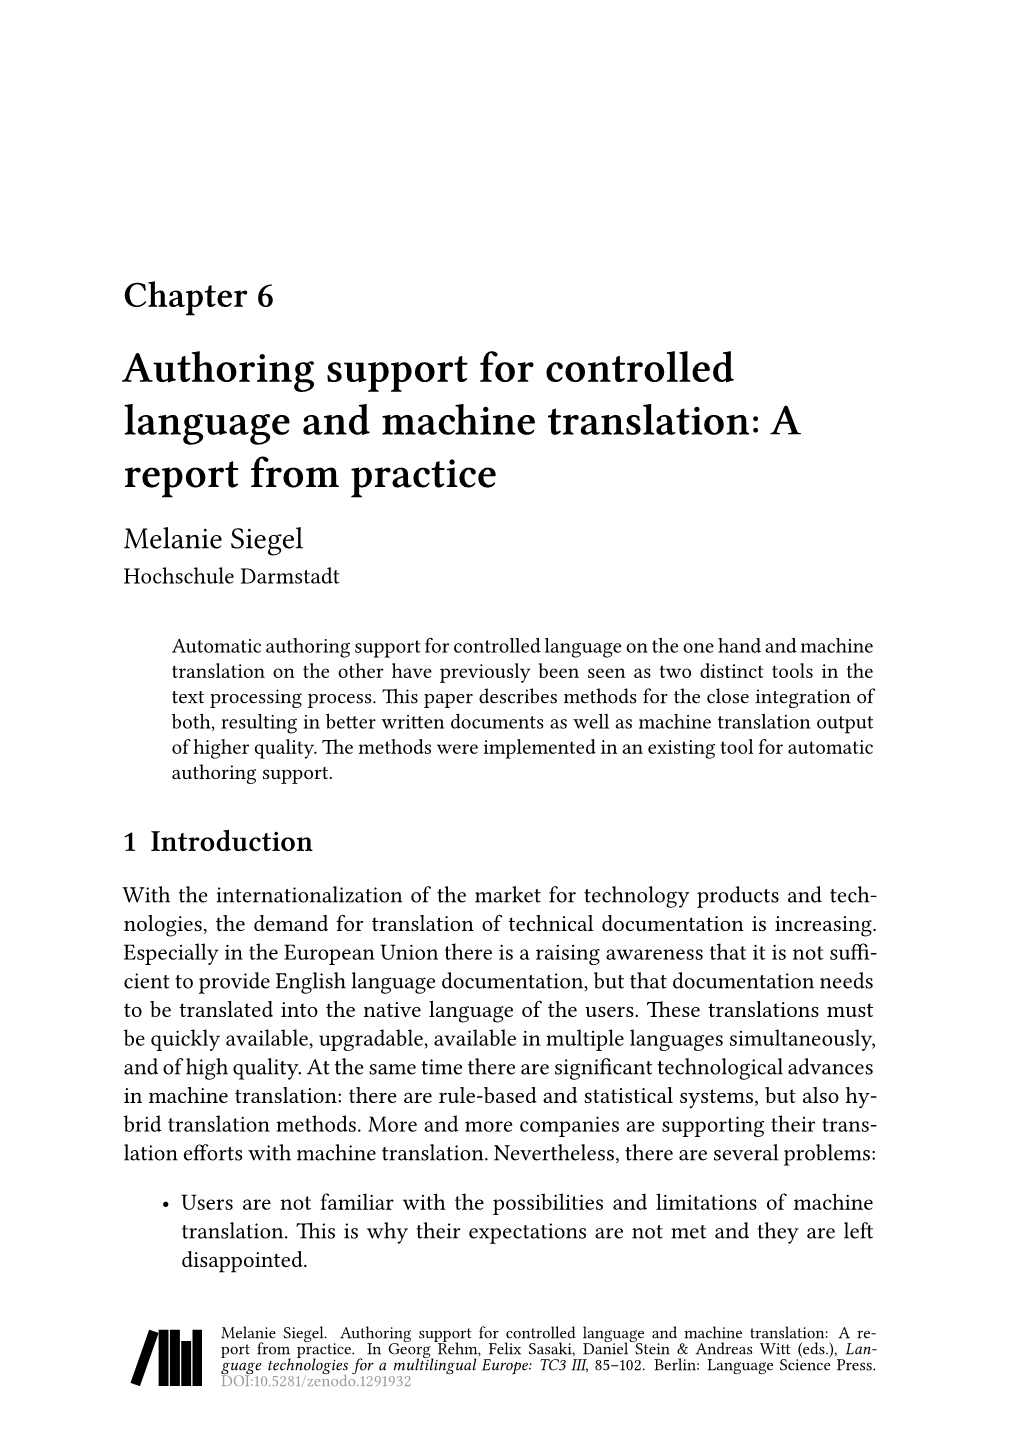 Authoring Support for Controlled Language and Machine Translation: a Report from Practice Melanie Siegel Hochschule Darmstadt